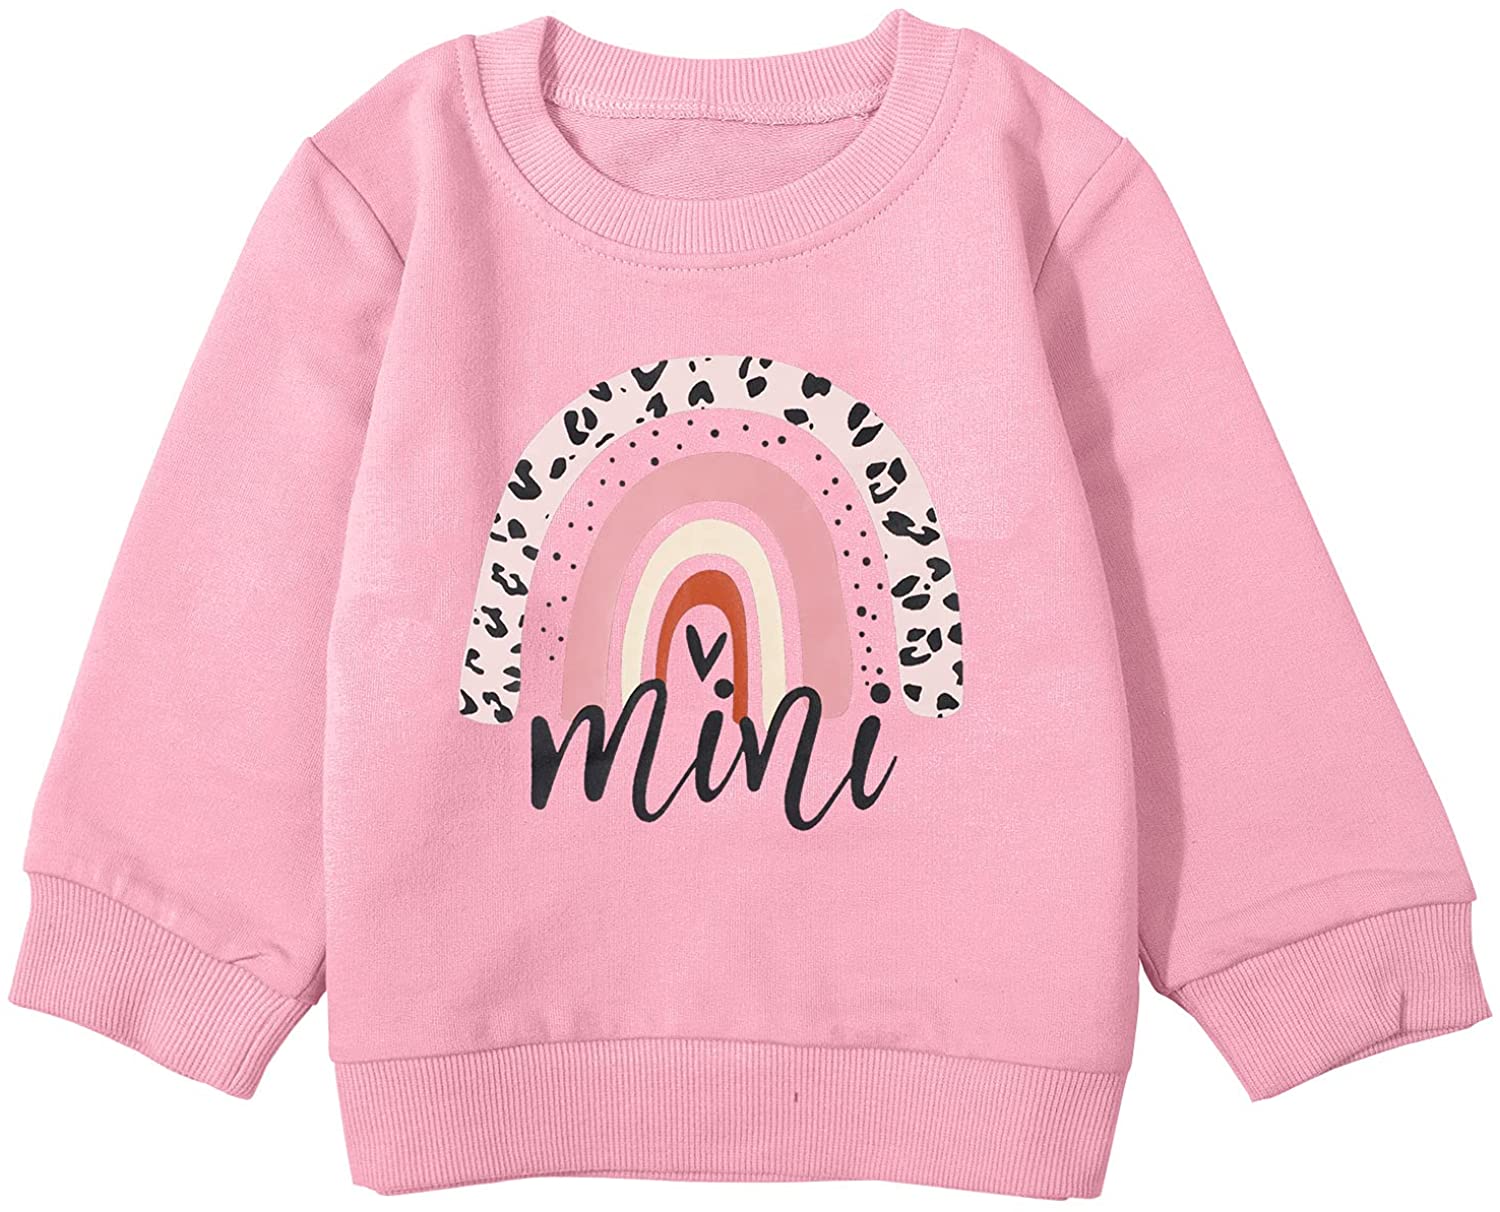 Baby Girls Sweatshirt Mamas Girl Rainbow Shirts Casual Long Sleeve Pullover Top Fall Winter Outfit Cotton Clothes 